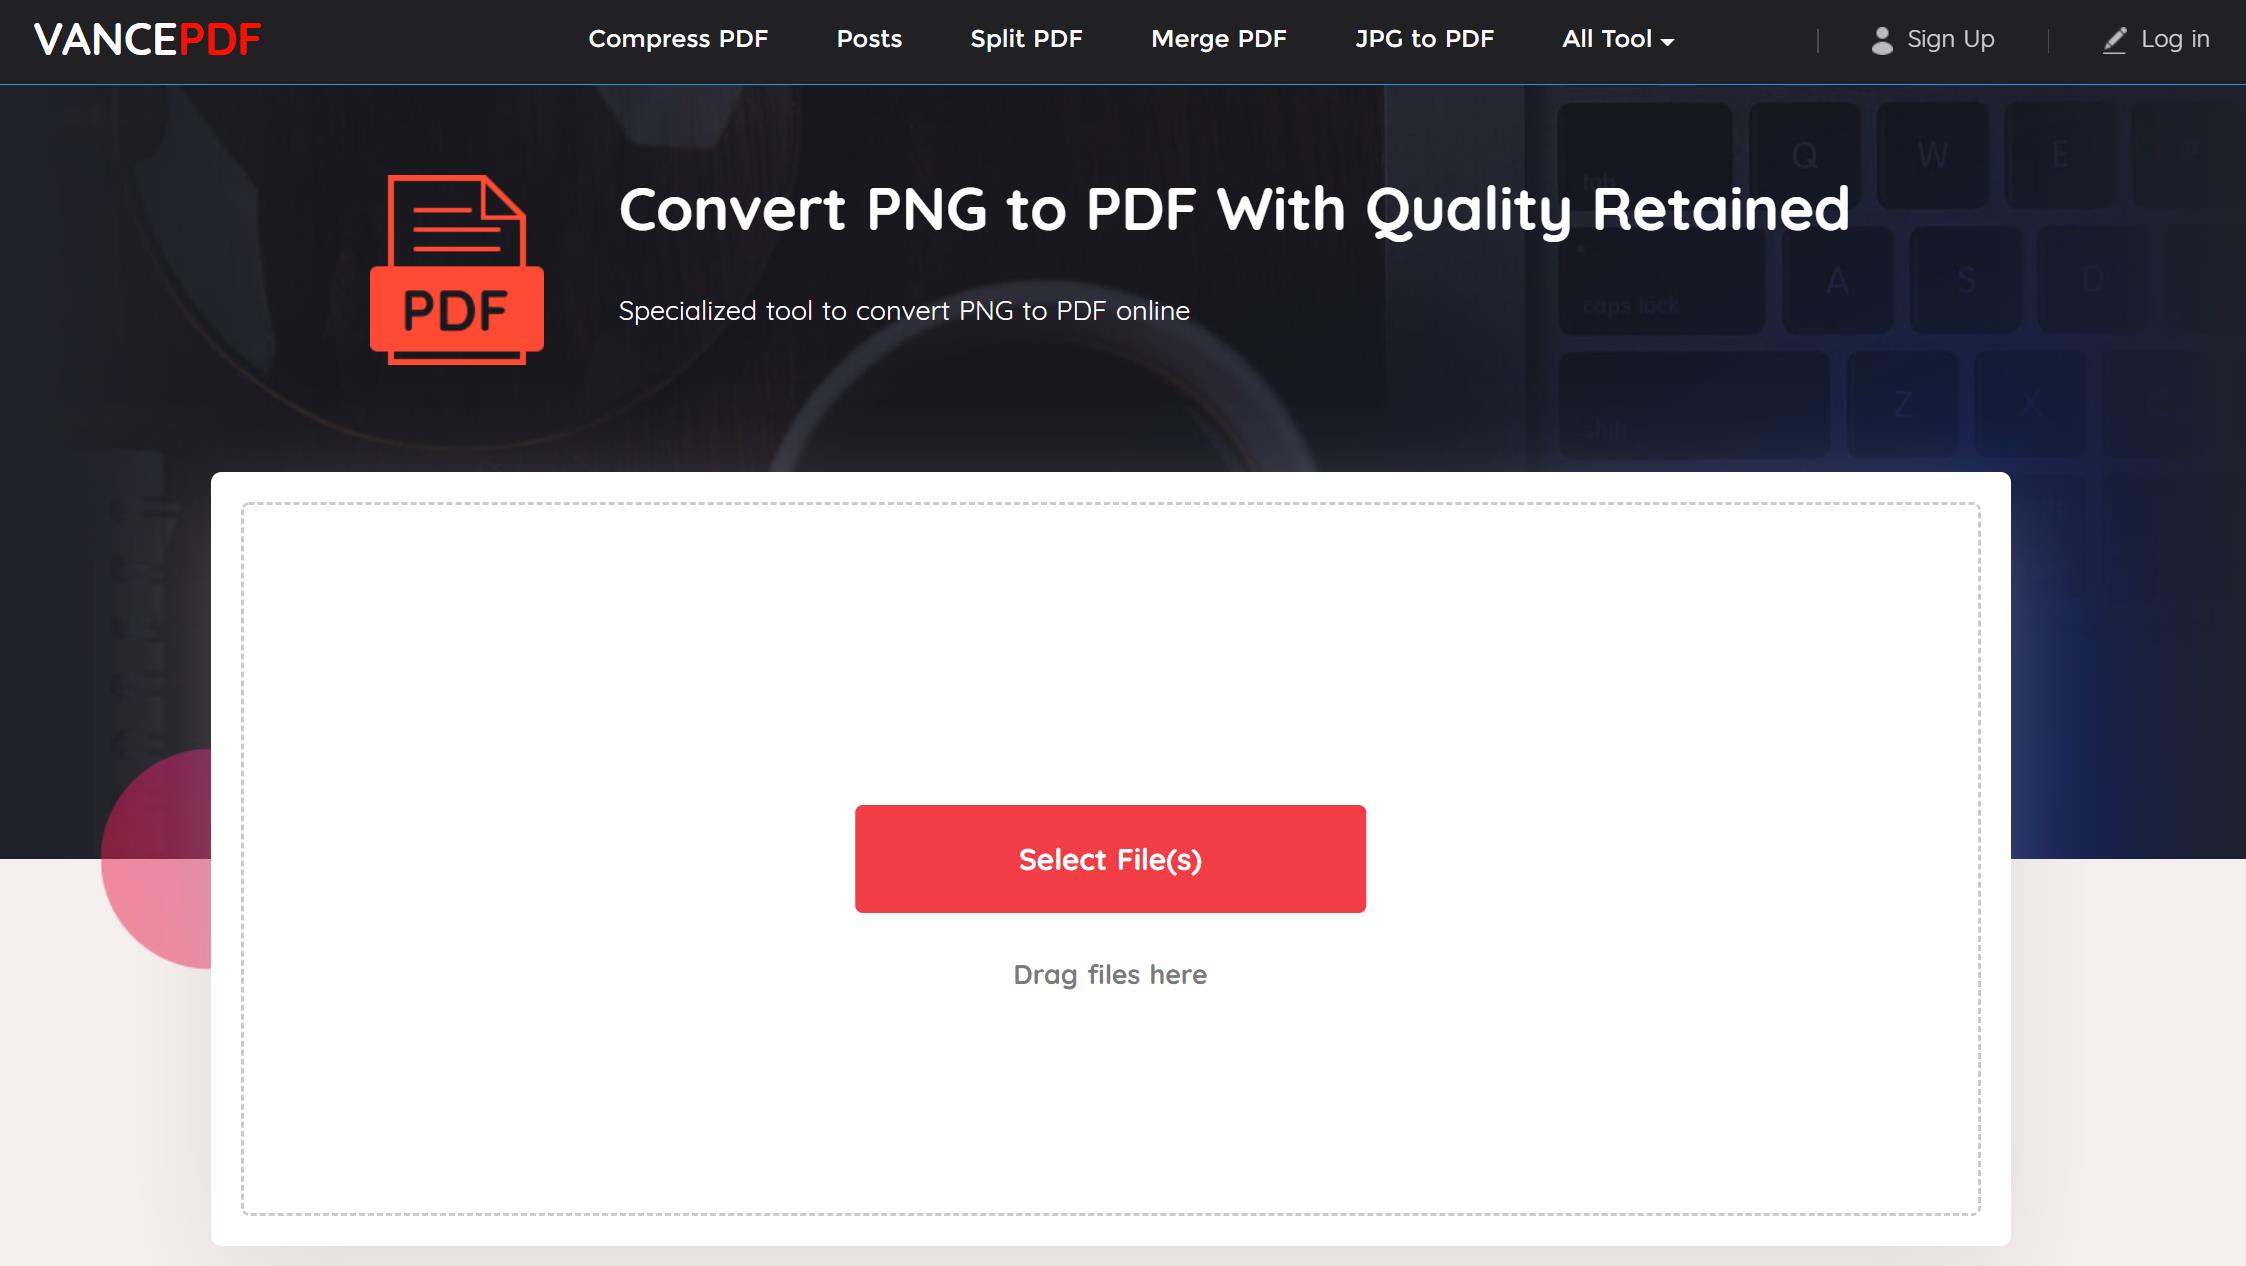 Converting PNG to PDF with VancePDF